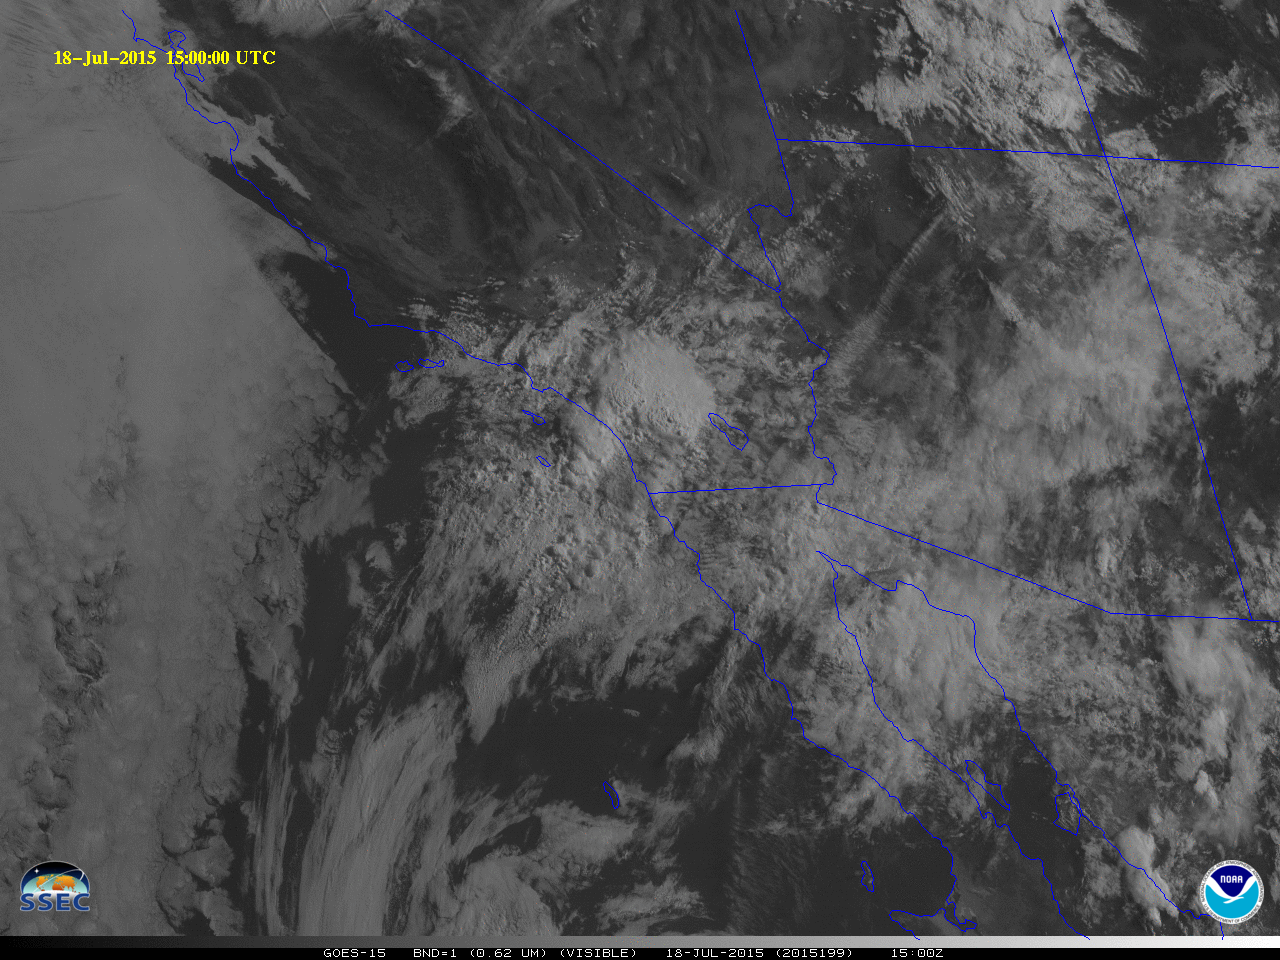 GOES-15 Visible (0.65 µm) Images, 1300 UTC 18 July through 0300 UTC 19 July 2015  (click to play animation)